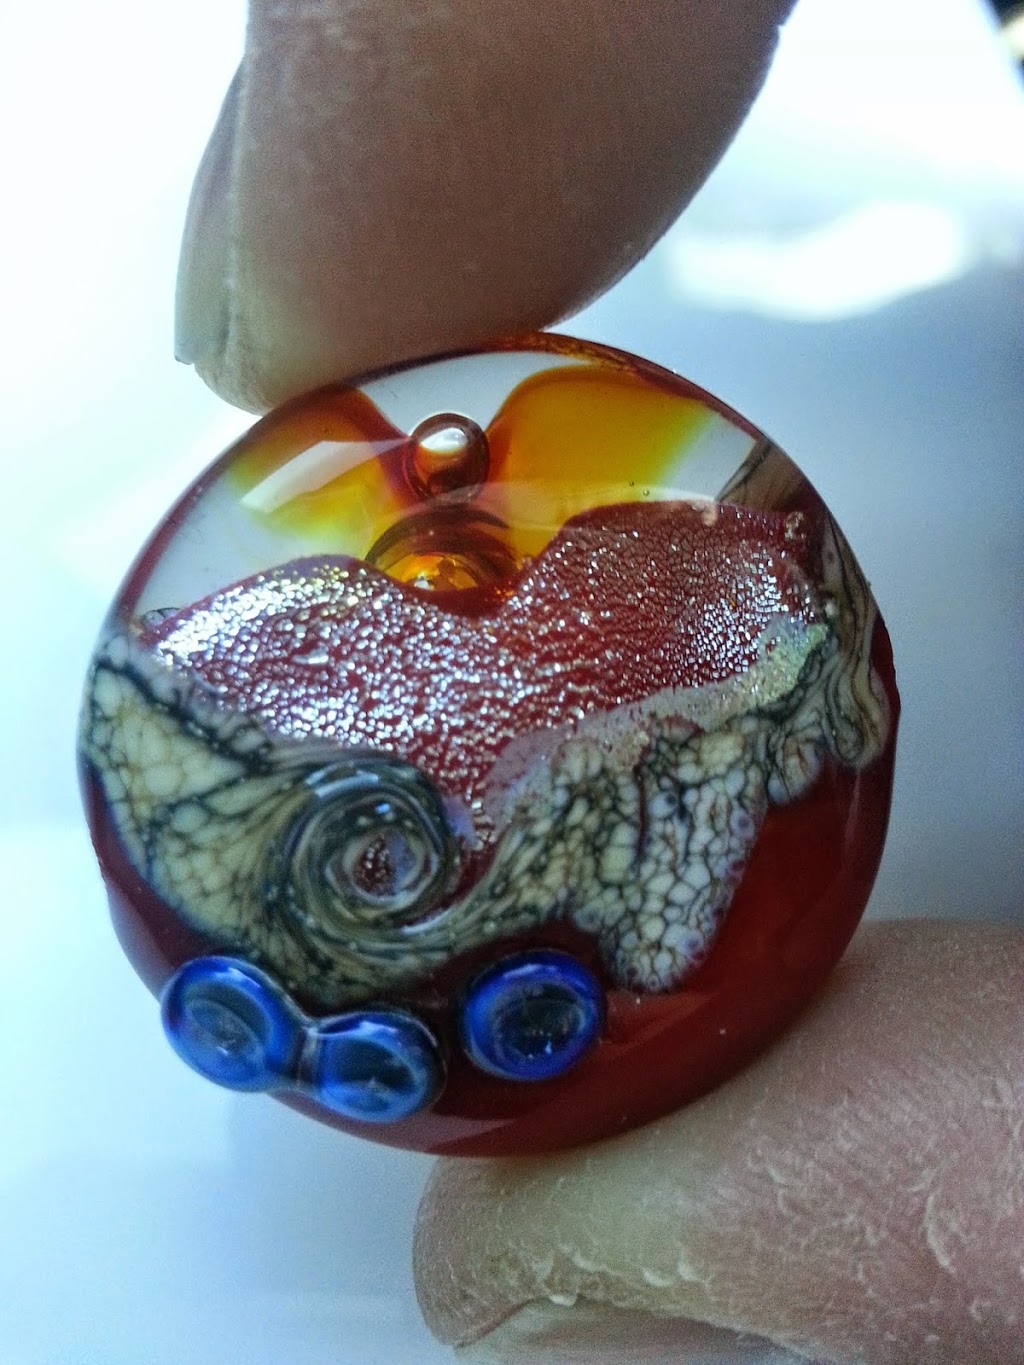 Yellow Point Art Glass Studio and Gift Shop | 3272 Roper Rd, Ladysmith, BC V9G 1C4, Canada | Phone: (250) 618-1103